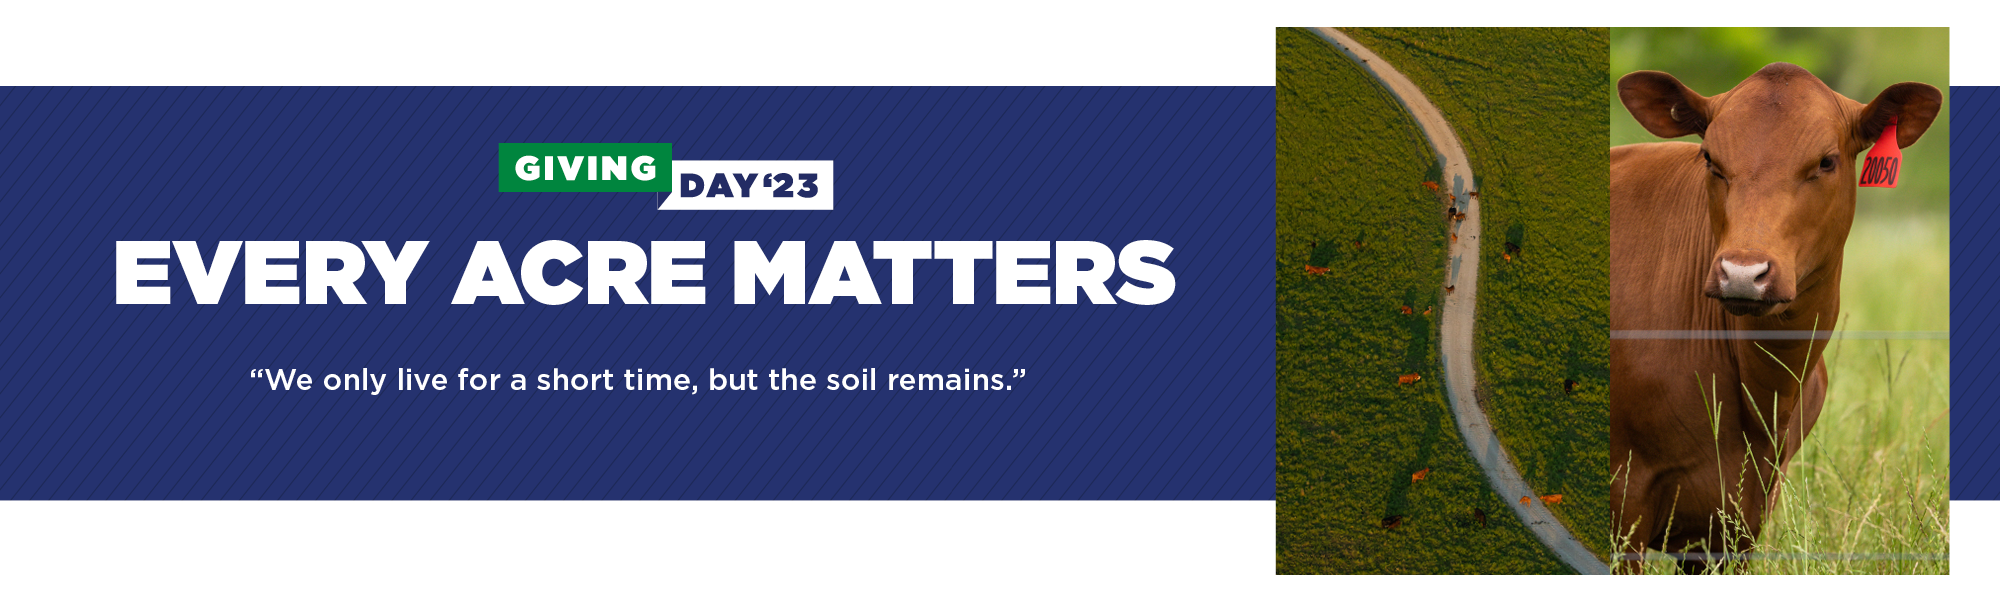 Giving Day ‘23 | We only live for a short time, but the soil remains.